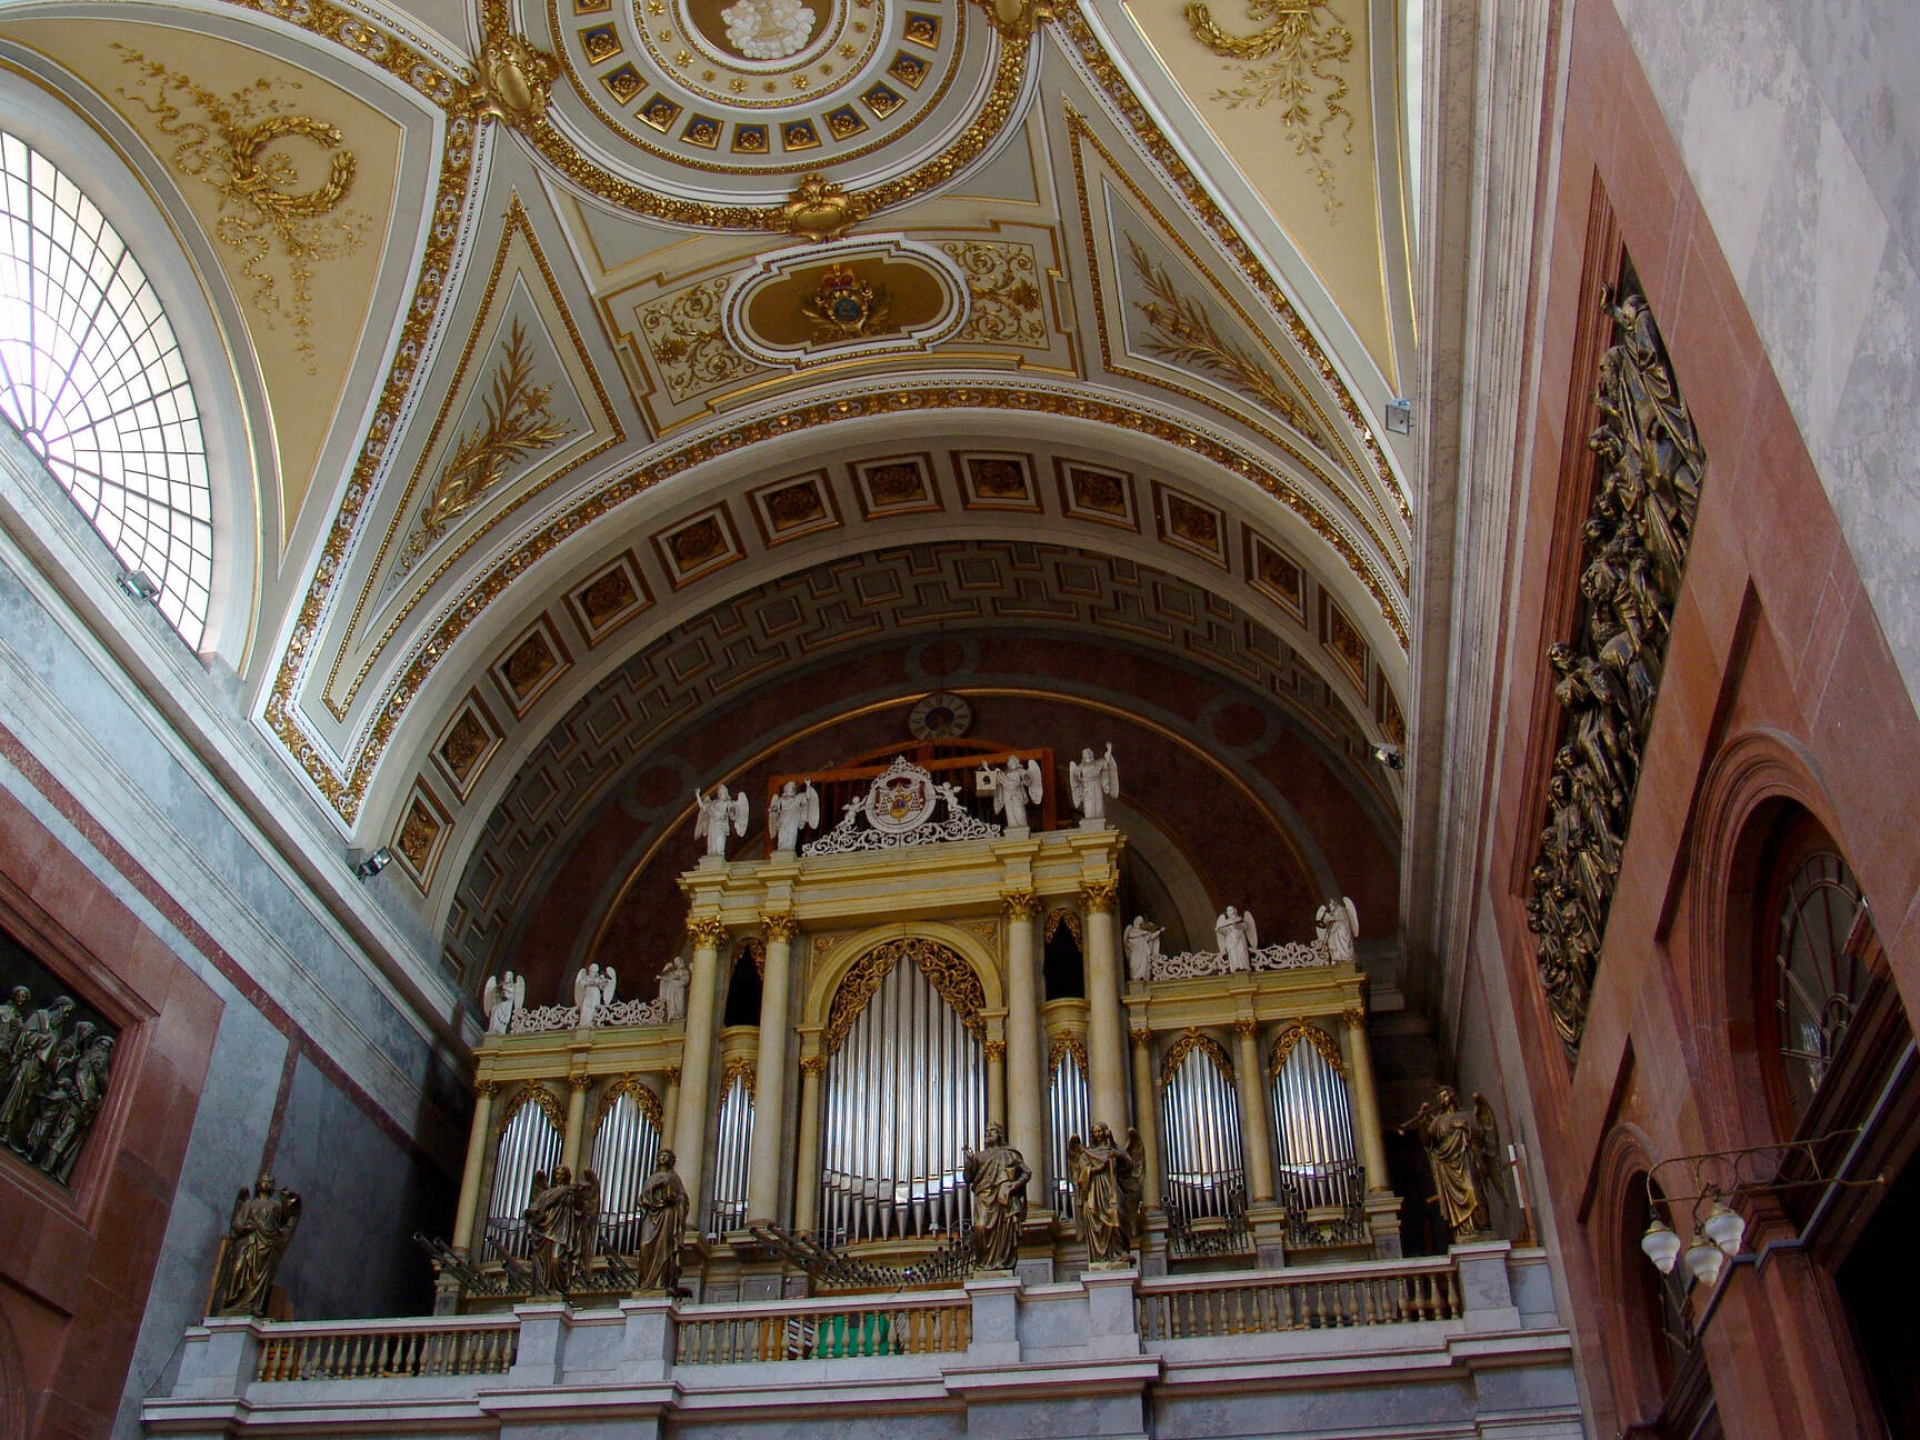 Pipe Organ: The catholic cathedral of Esztergom, Hungary, A keyboard musical instrument. 1920x1440 HD Wallpaper.